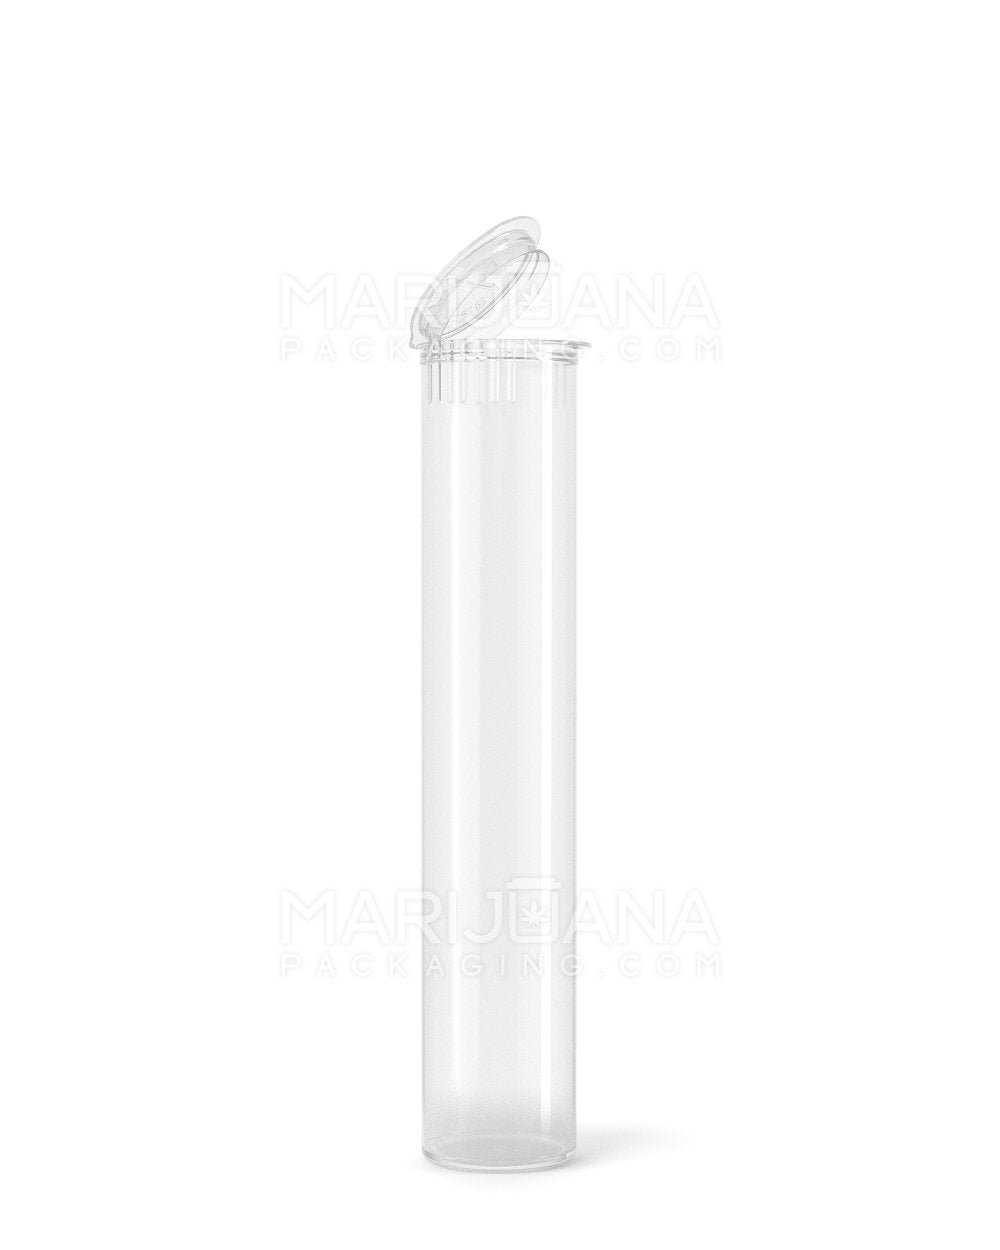 Child Resistant Pop Top Plastic Pre-Roll Tubes | 98mm - Clear | Sample - 1